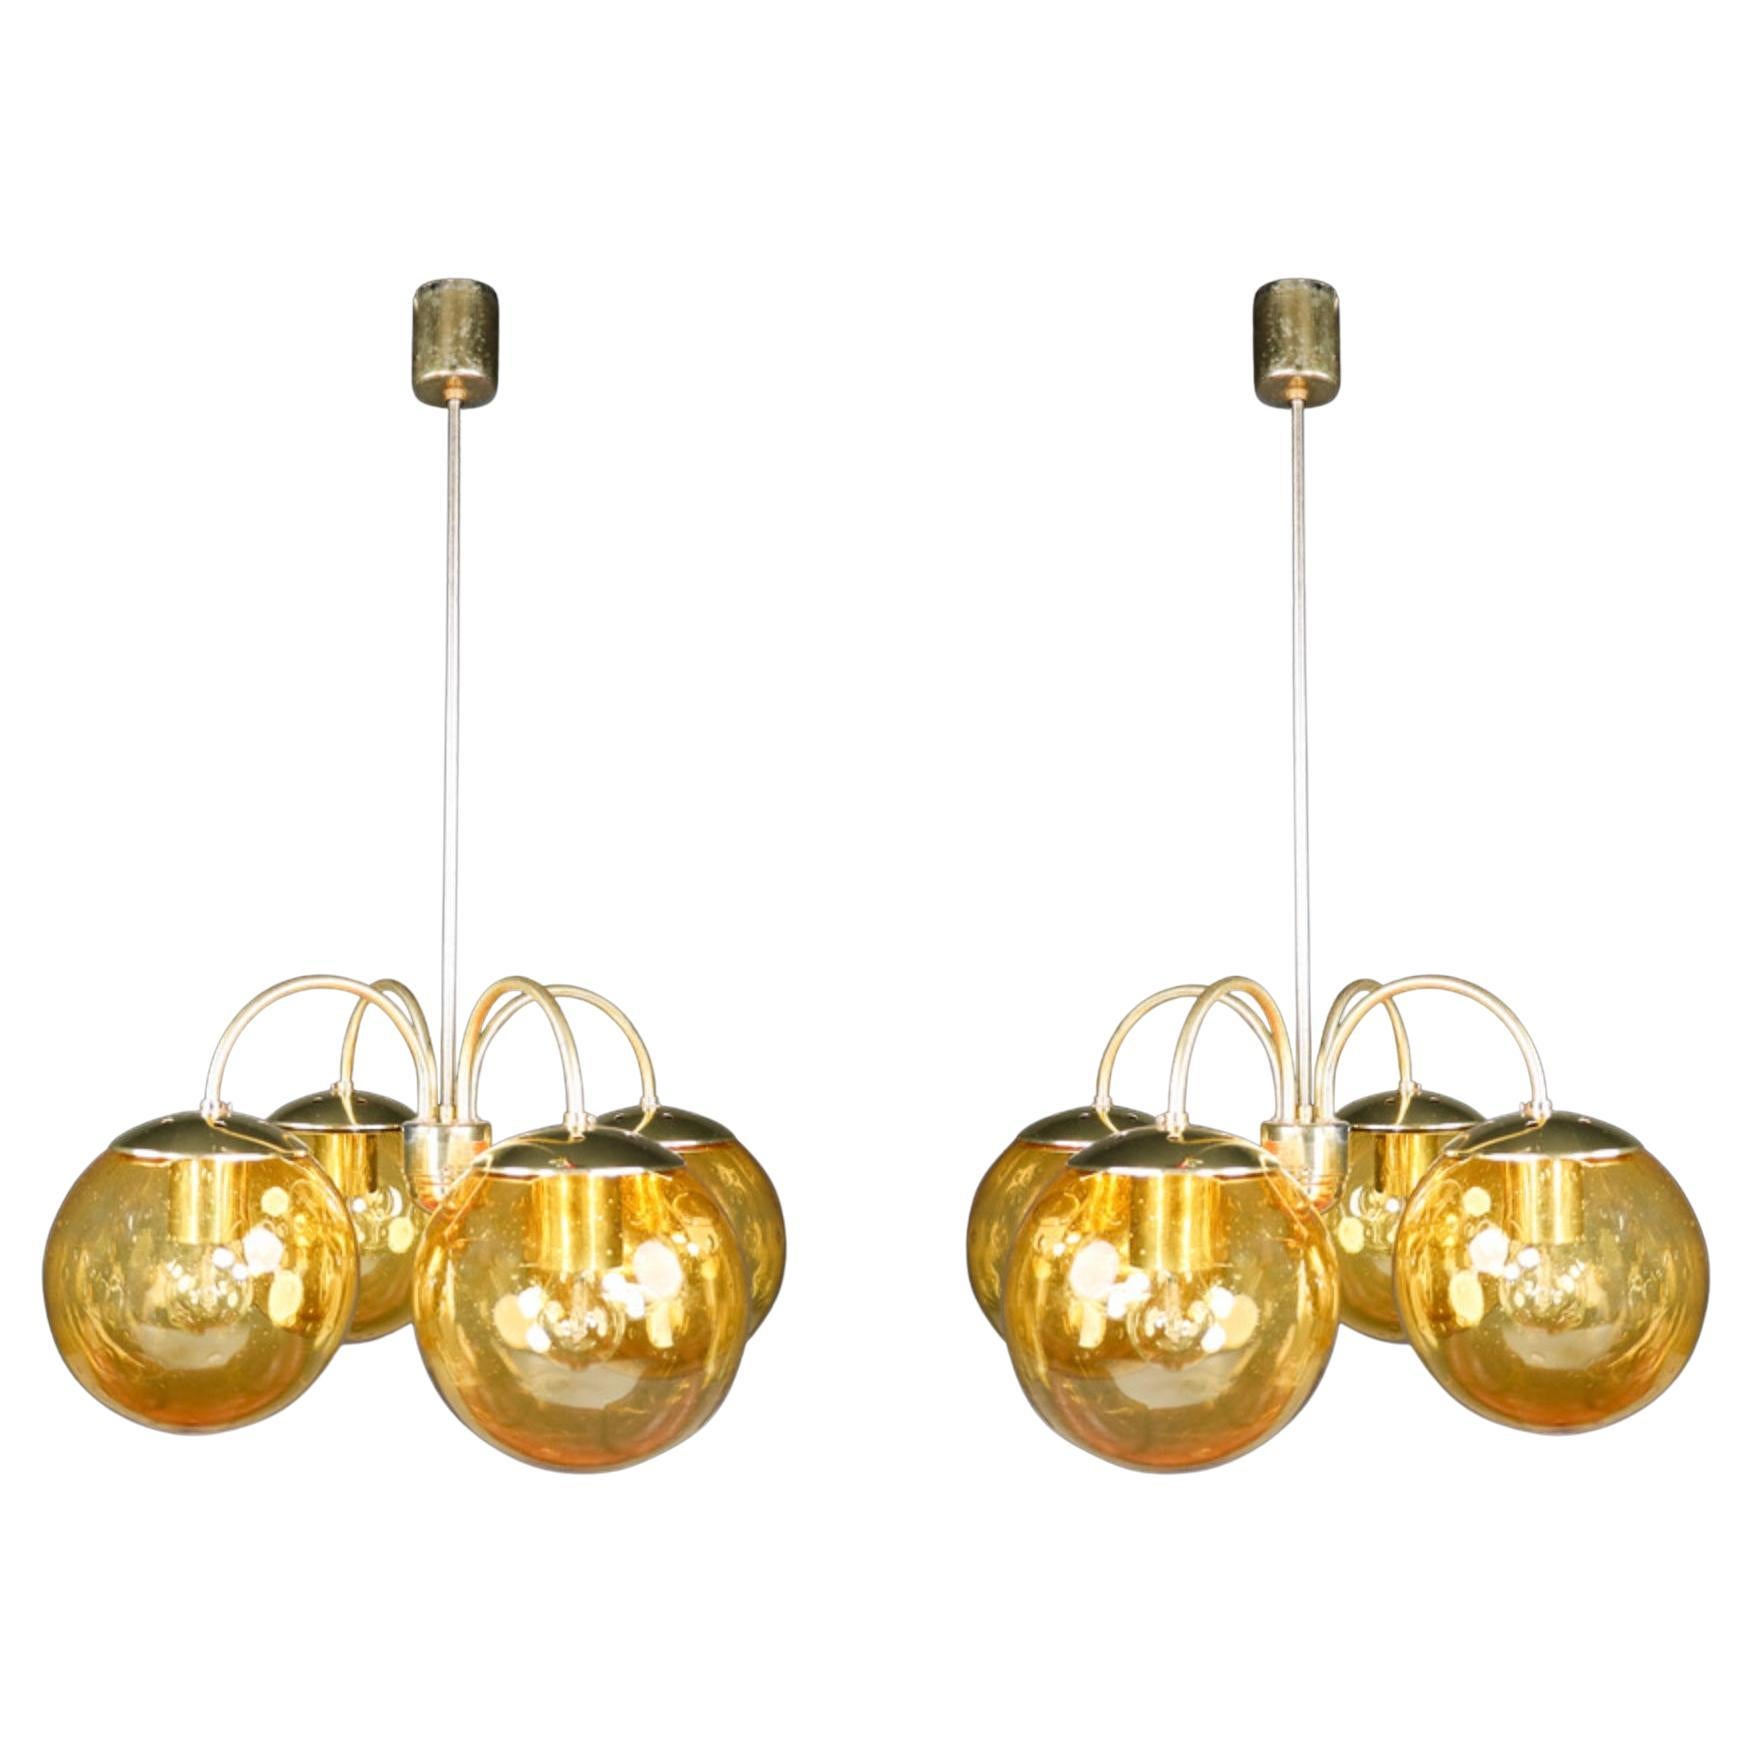 Midcentury Chandeliers in Brass and Amber-Colored Glass Czech Republic, 1960s For Sale